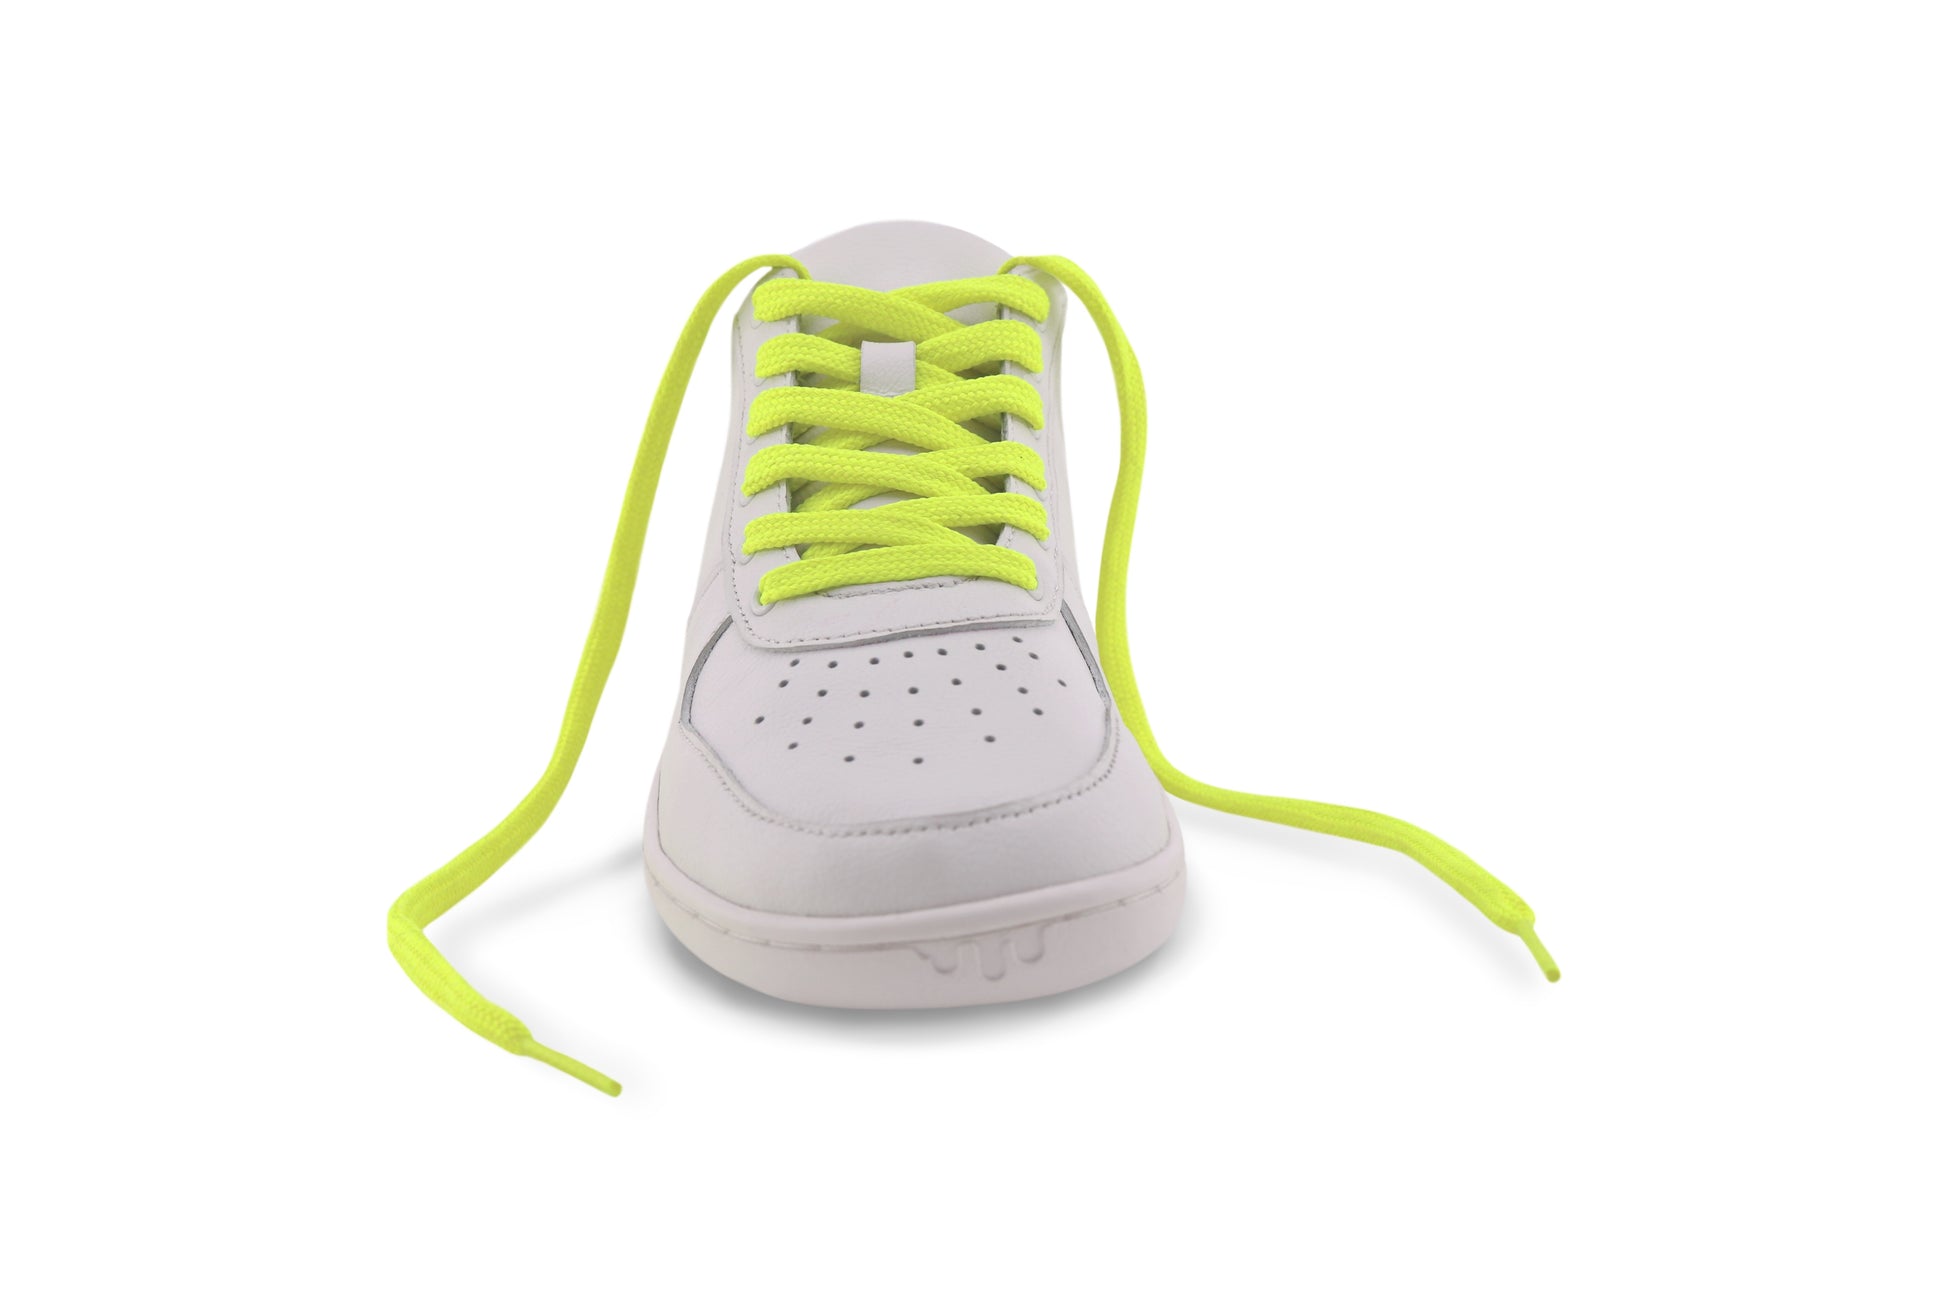 PaperKrane White Low sneaker with neon yellow laces